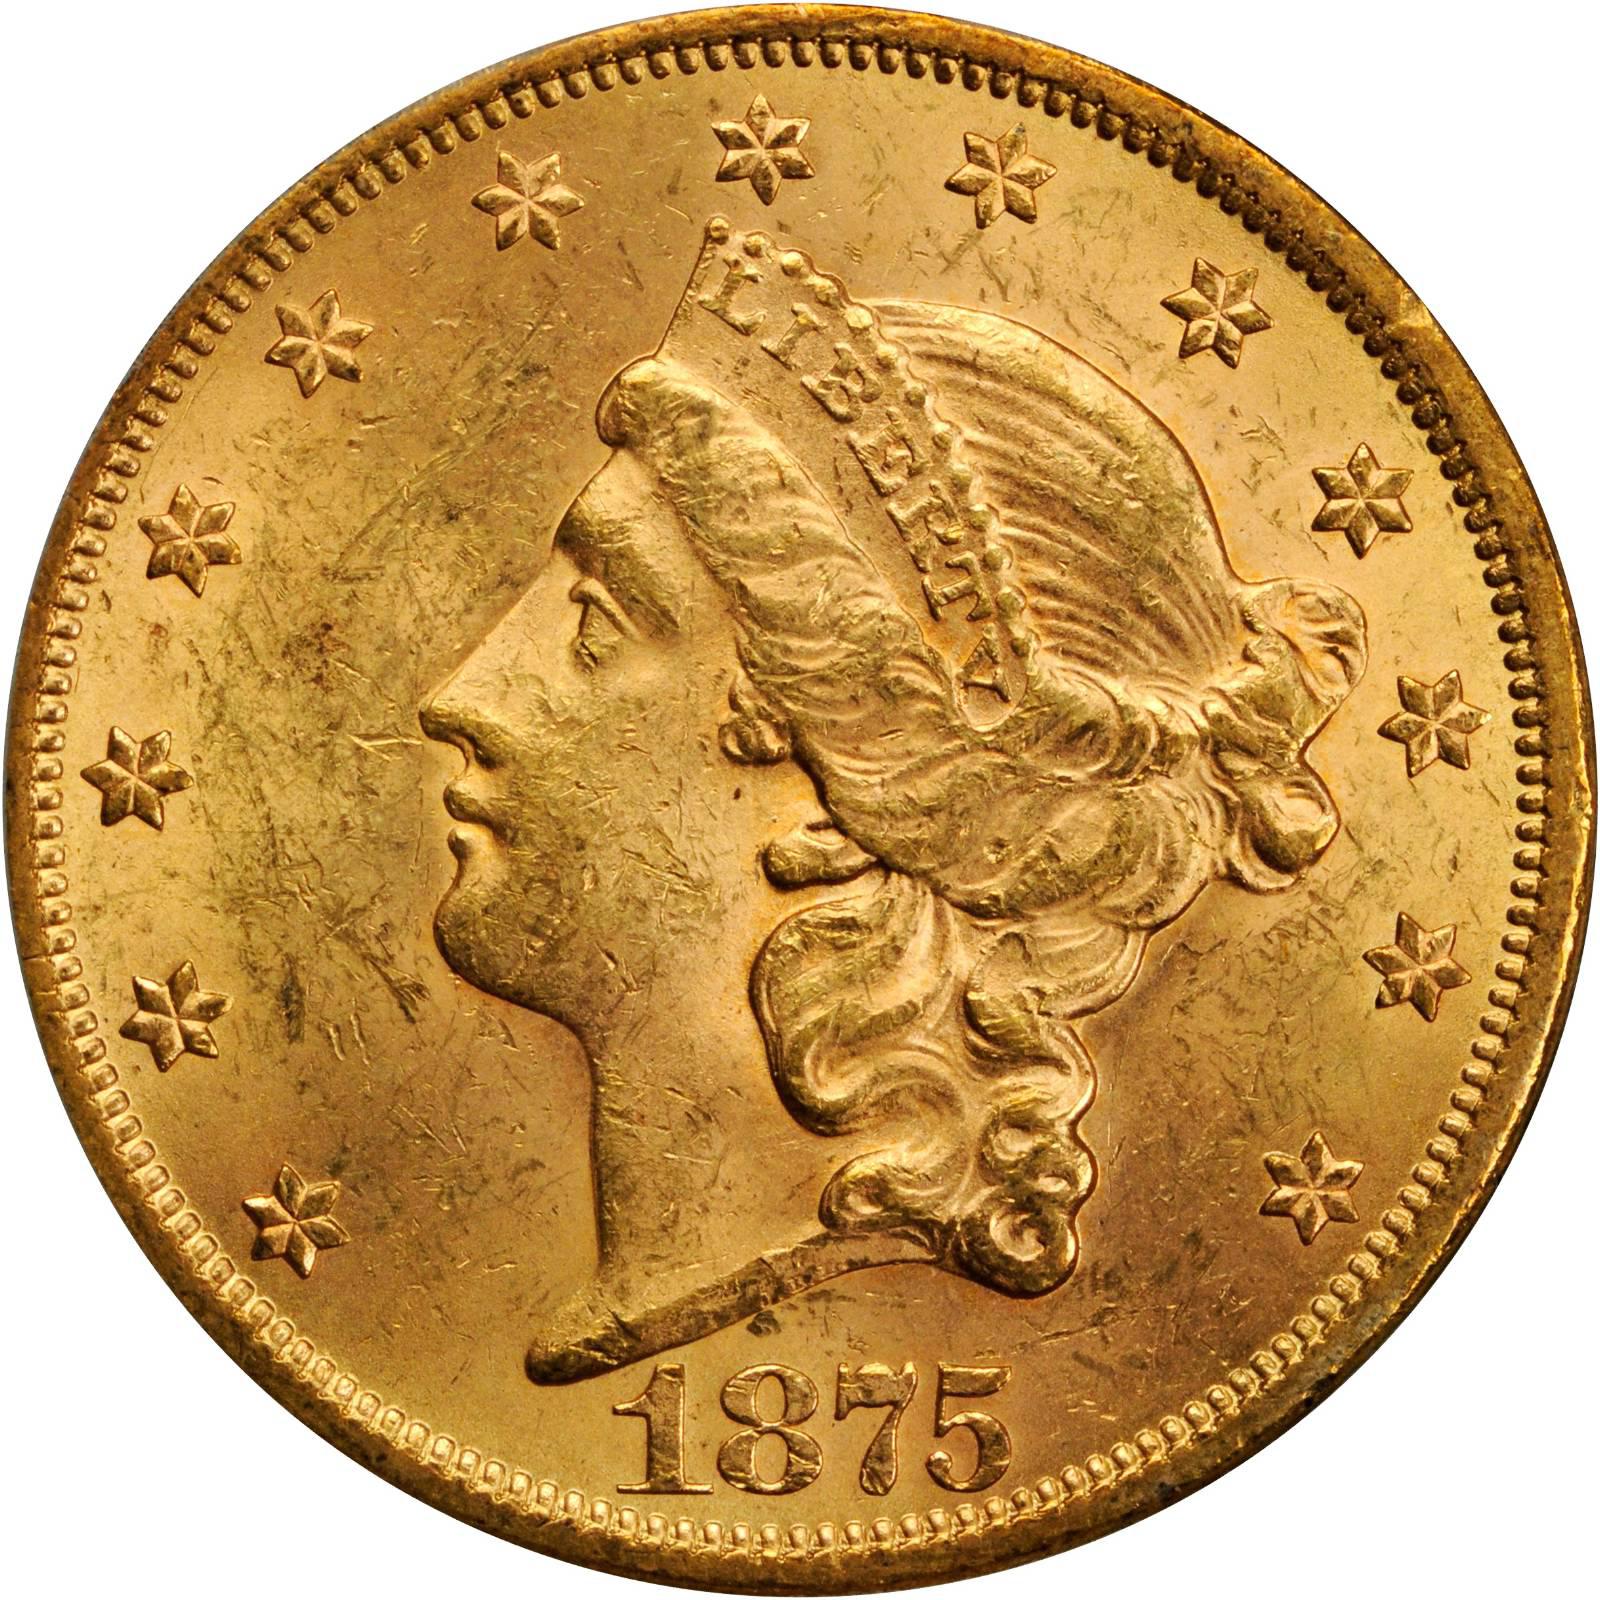 value-of-1875-20-liberty-double-eagle-sell-rare-coins